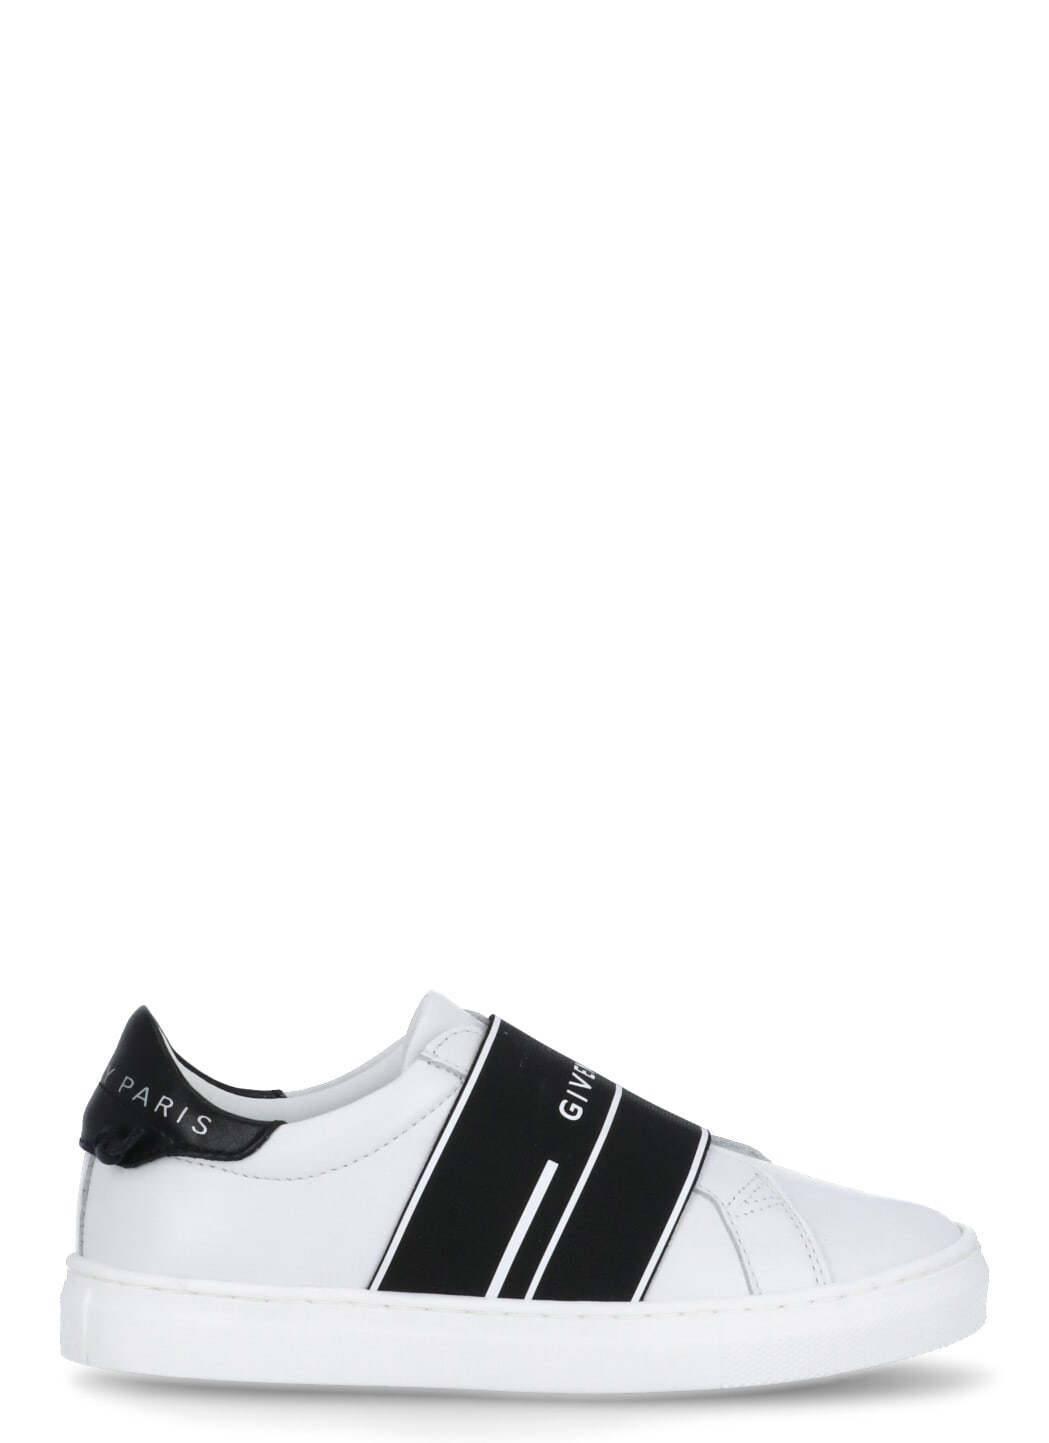 Givenchy Footwear Acces Sneakers